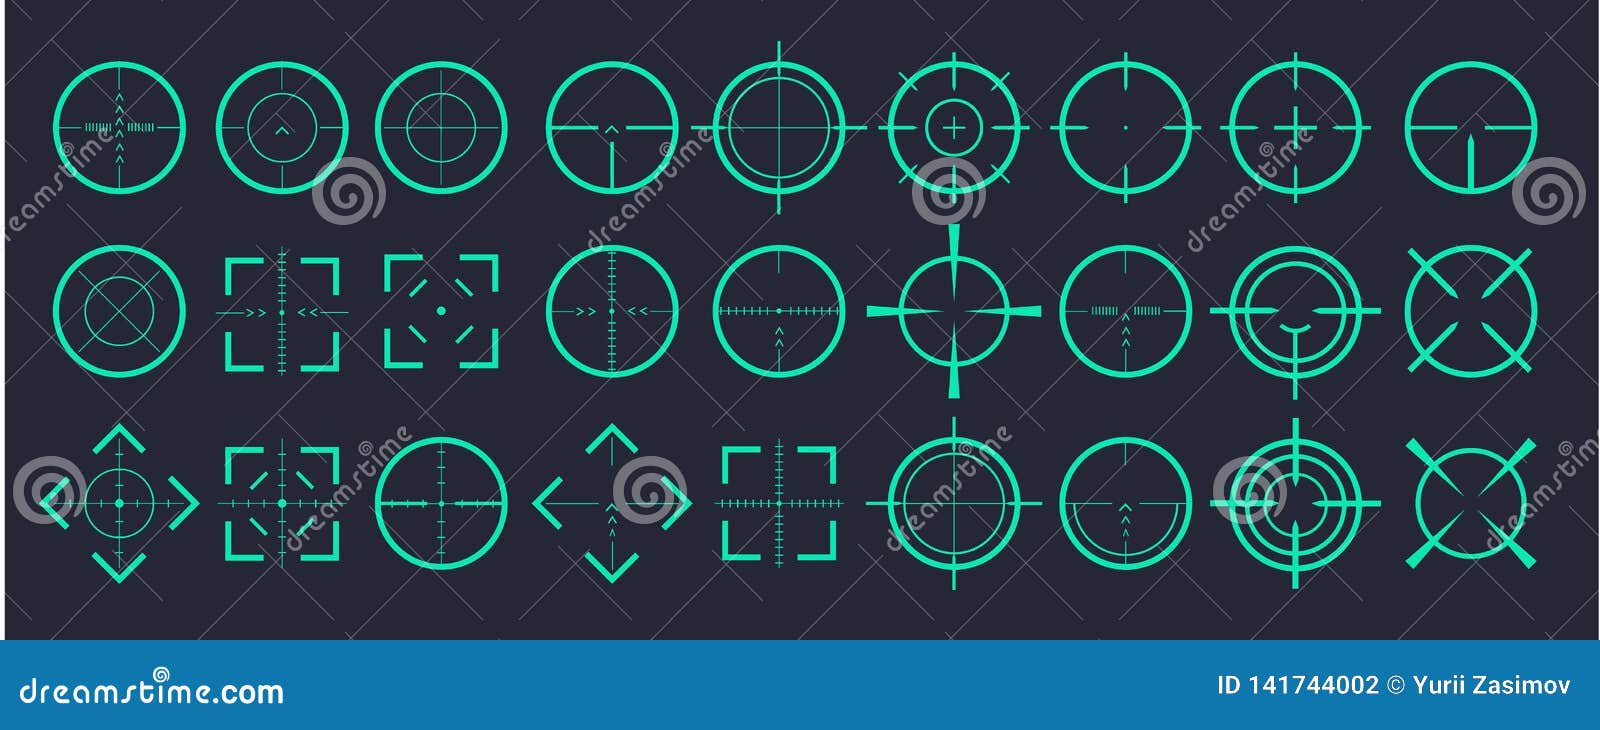 target aim and aiming to bullseye signs .creative   of crosshairs icon set  on